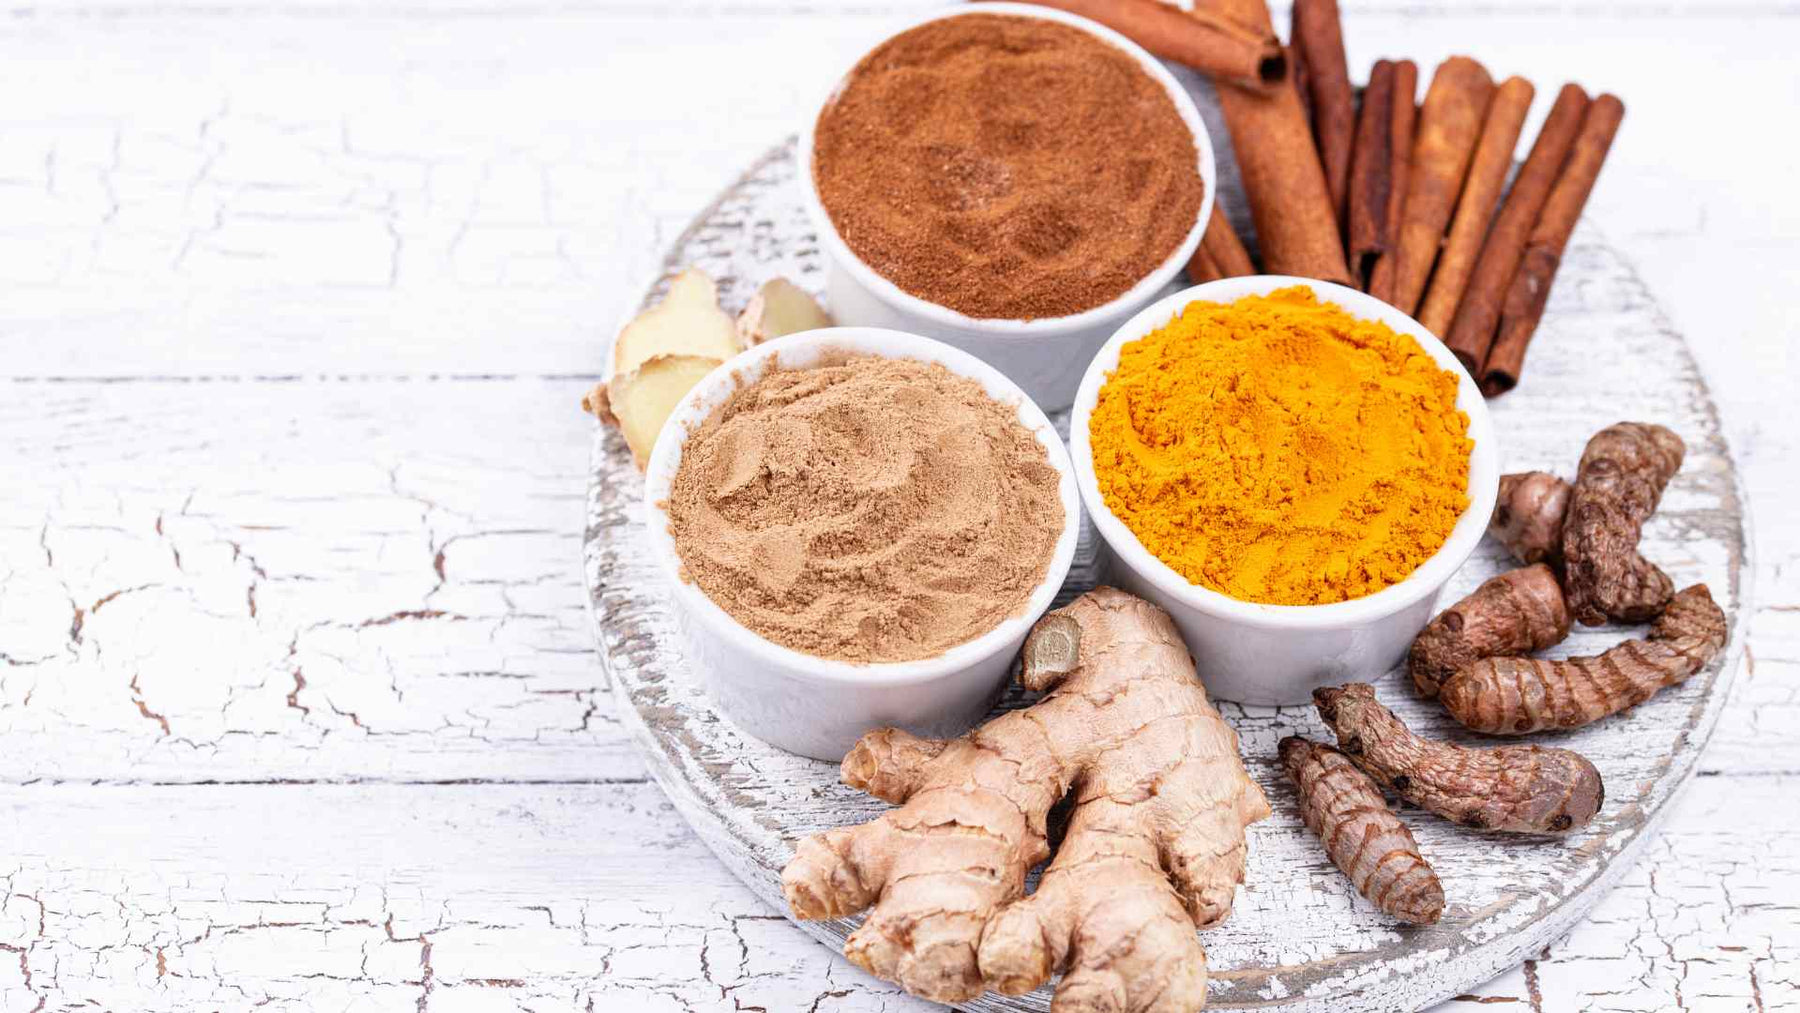 Spice Up Your Health: The Wonders of Cinnamon, Ginger, and Turmeric